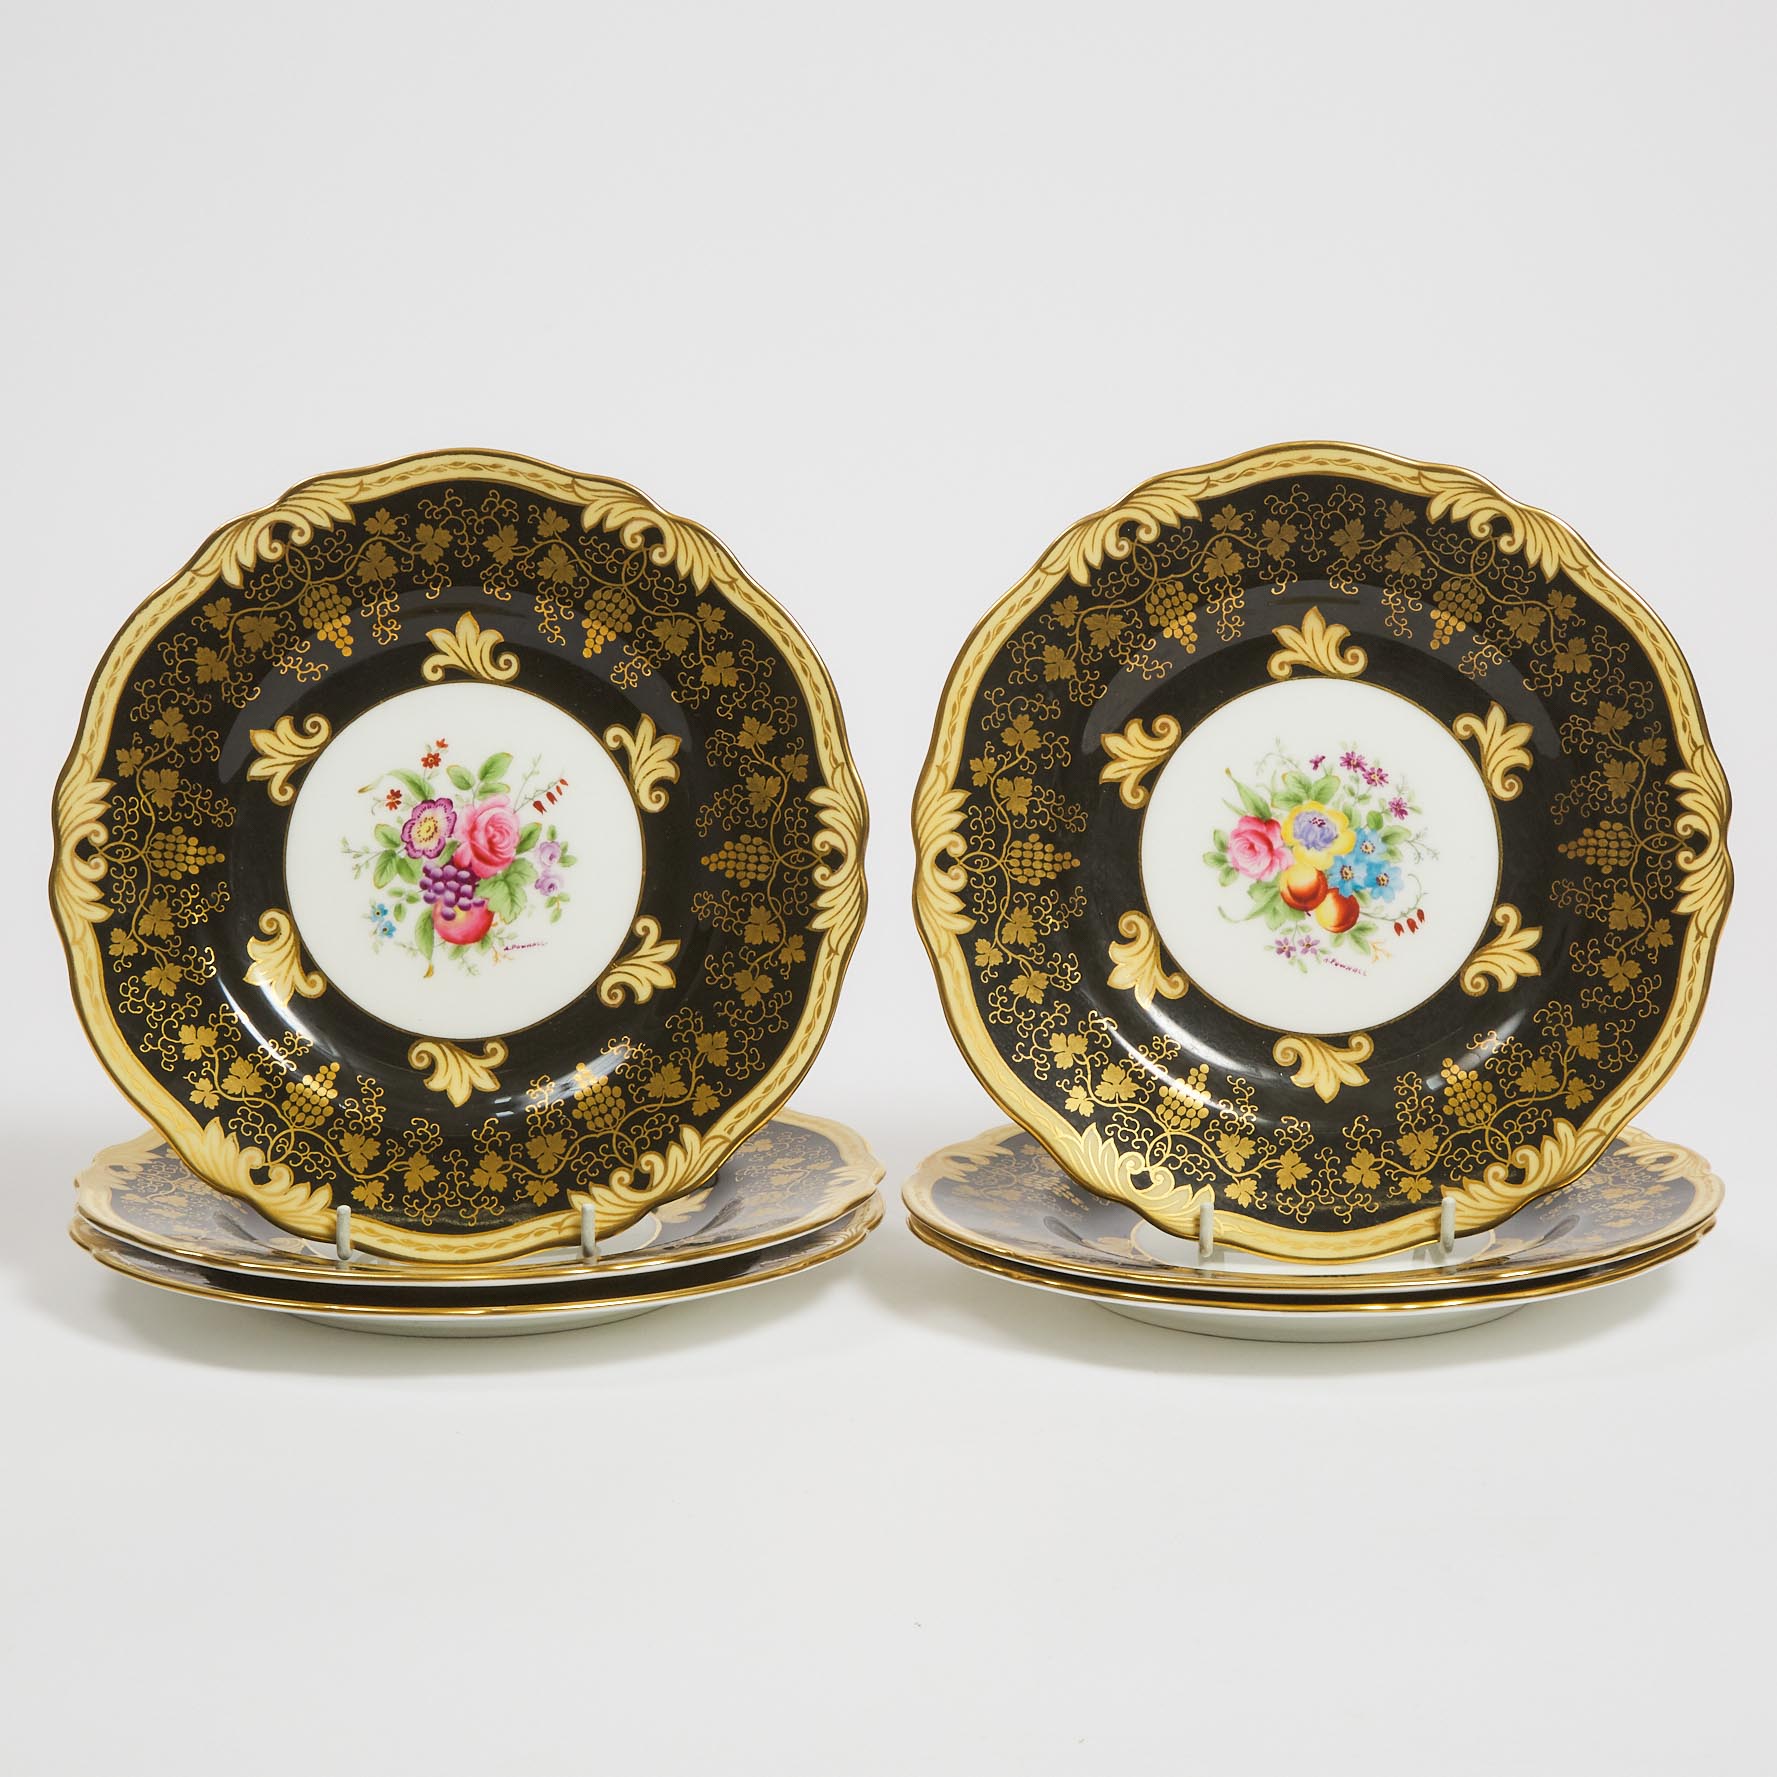 Six Wedgwood Black and Gilt Ground Fruit and Flowers Dessert Plates, A. Pownall, early 20th century